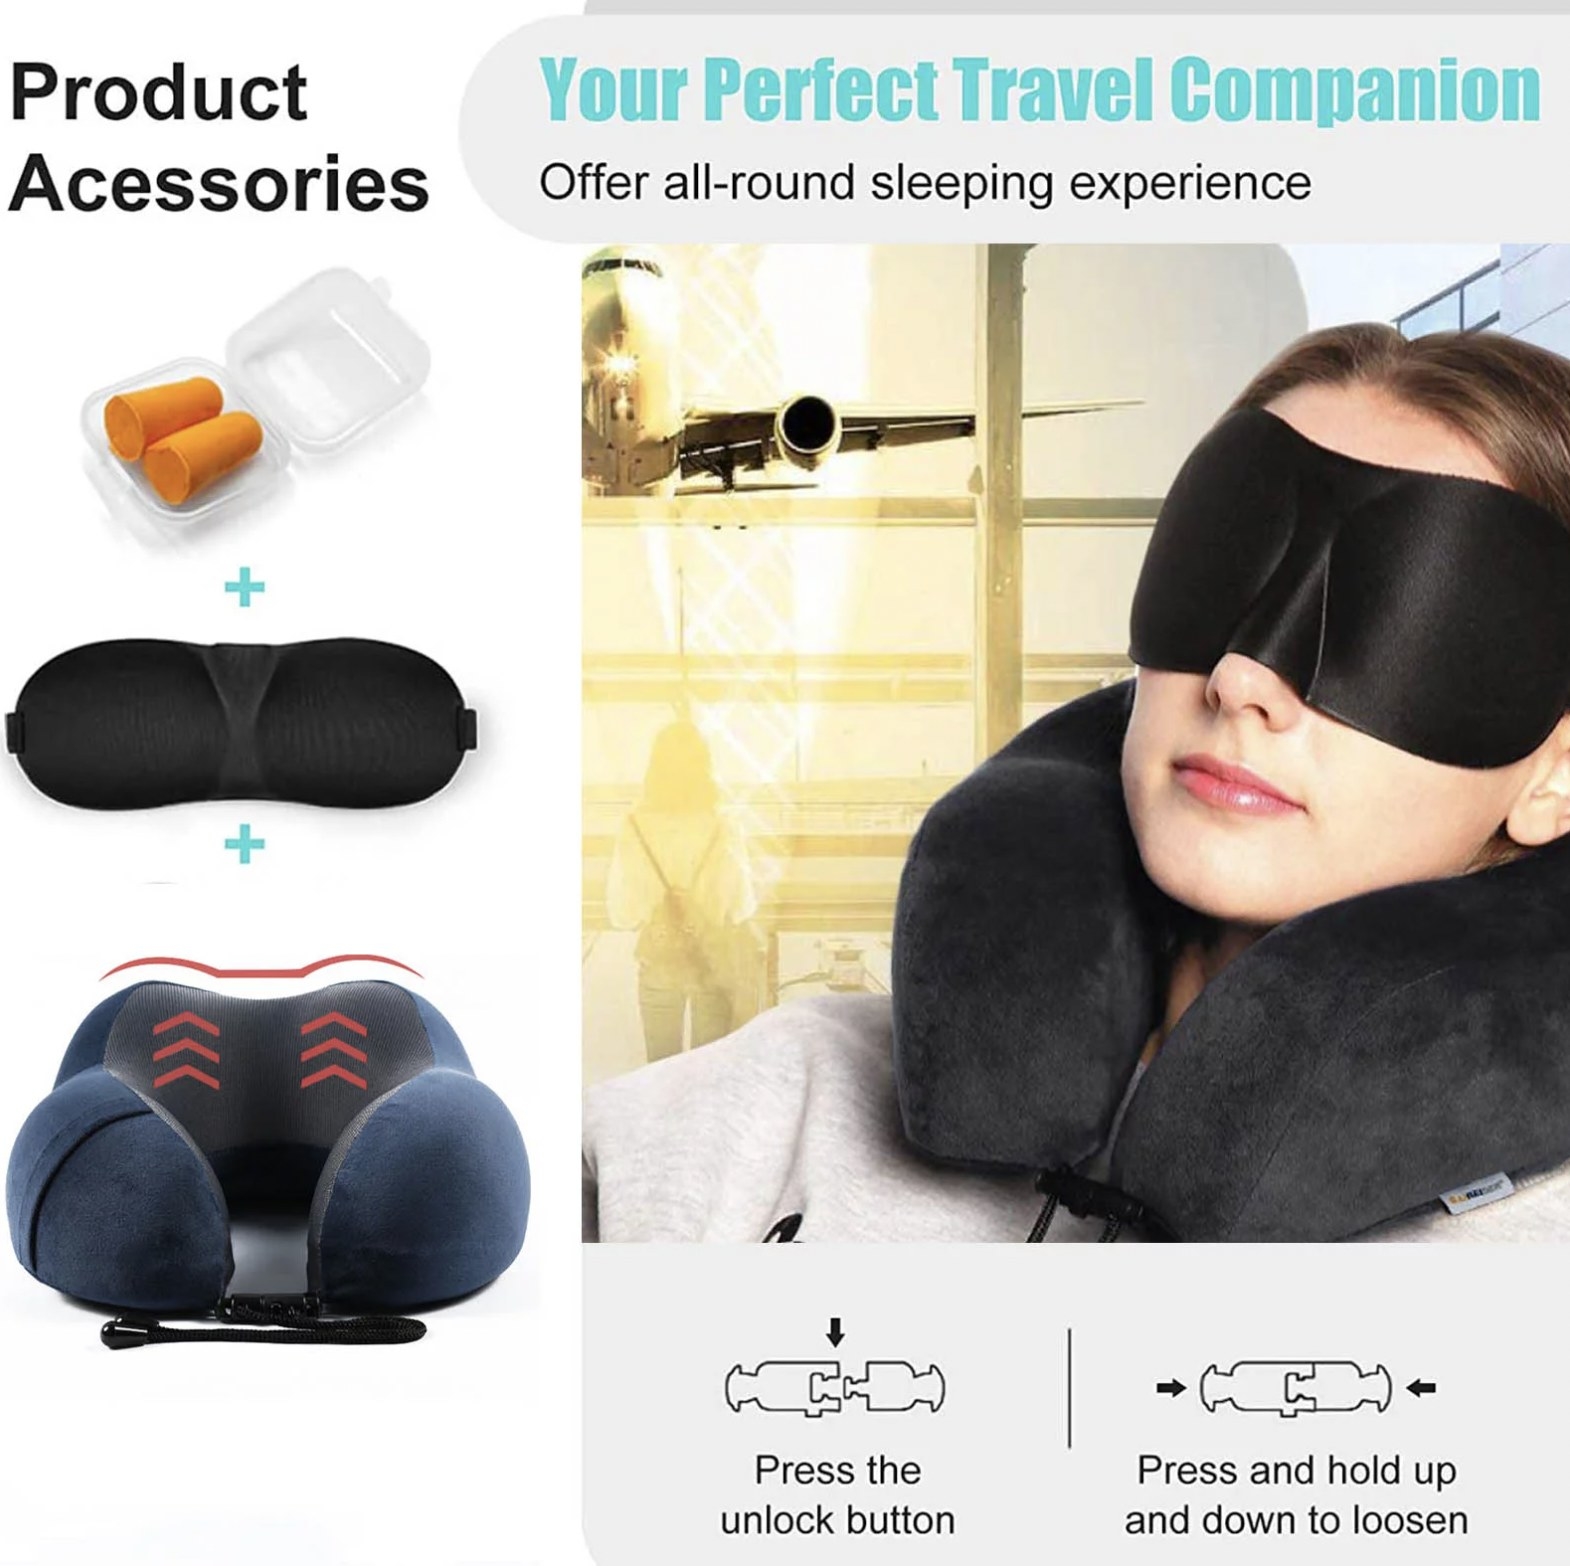 Someone sleeping with the pillow on neck and eye mask on with diagram showing the locking chip (right). Left shows all product accessories: earplugs, eye mask, and pillow